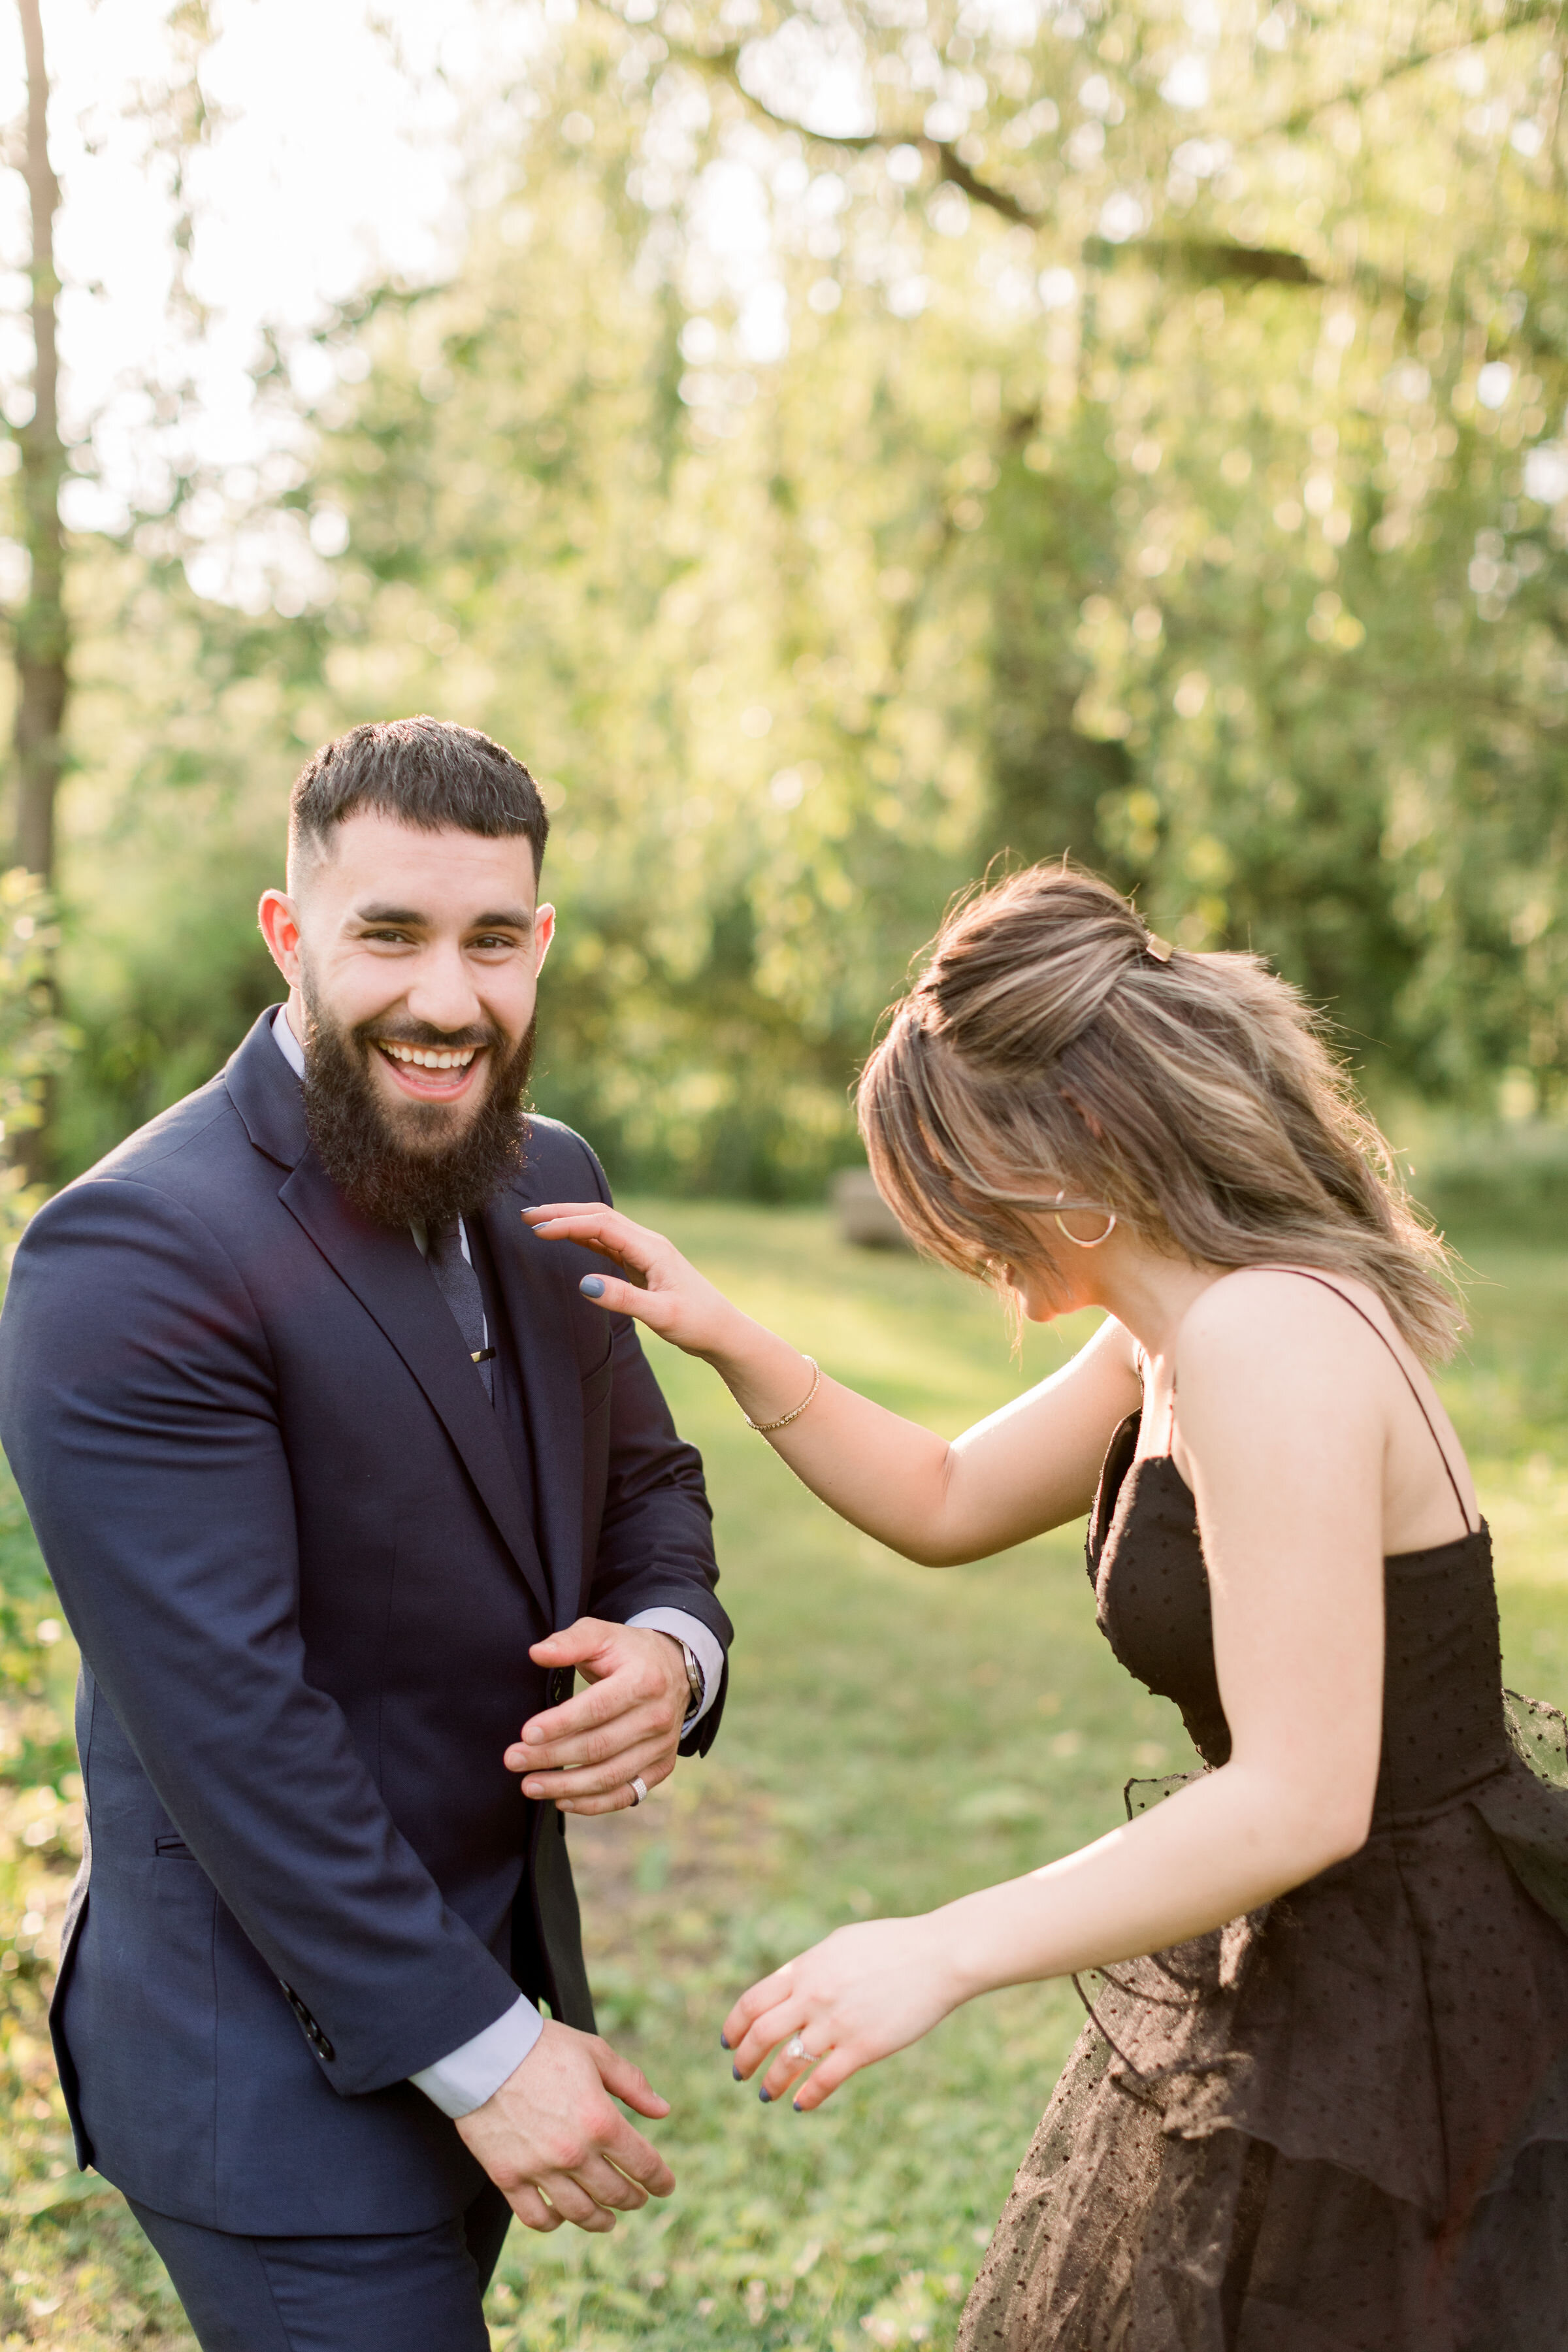  During this playful engagement session in Ottawa, Ontario, Chelsea Mason Photography captures this couple laughing with their heads back. laughing engagement photos formal engagement outfits women's black spaghetti strapped tea length dress with hee